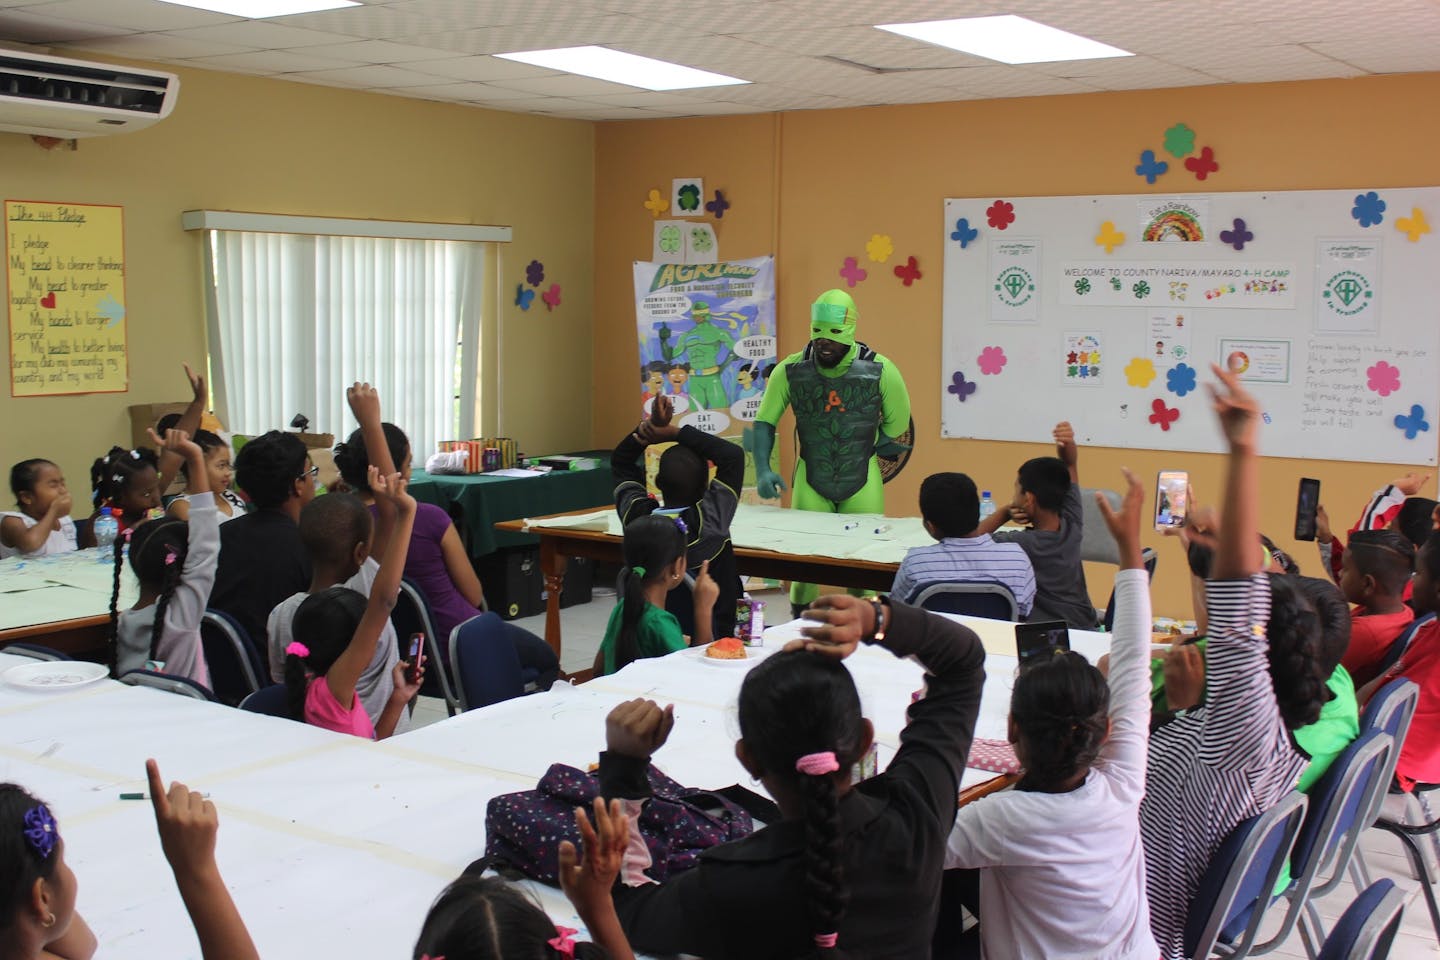 Meet AGRIman: Trinidad & Tobago’s Superhero on a mission to create a hunger-free world